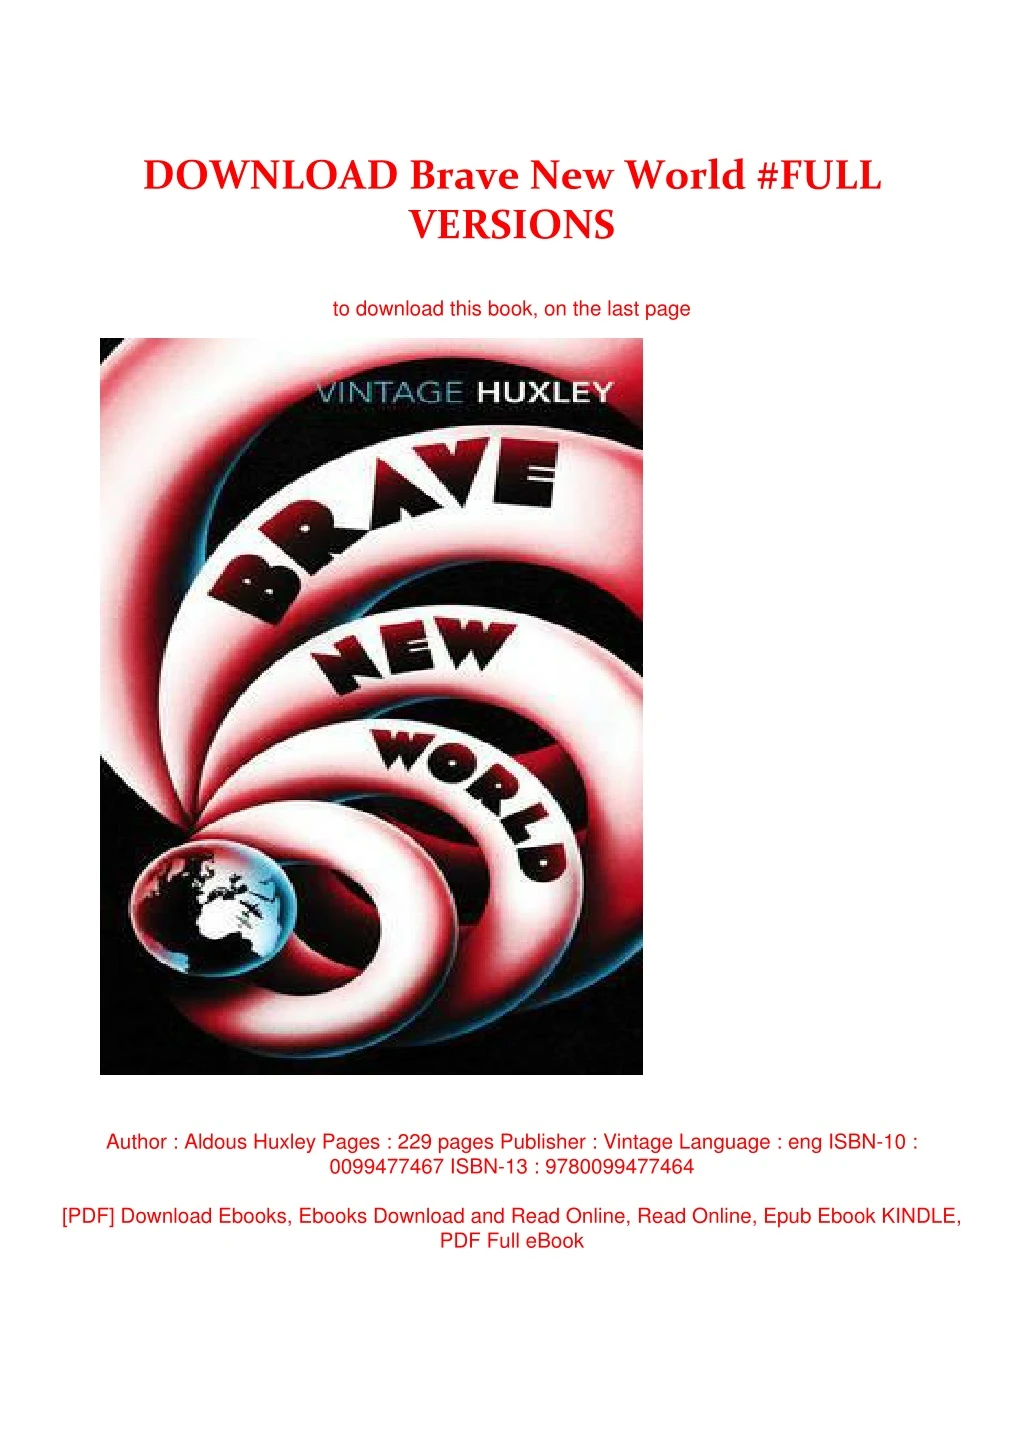 download brave new world full versions